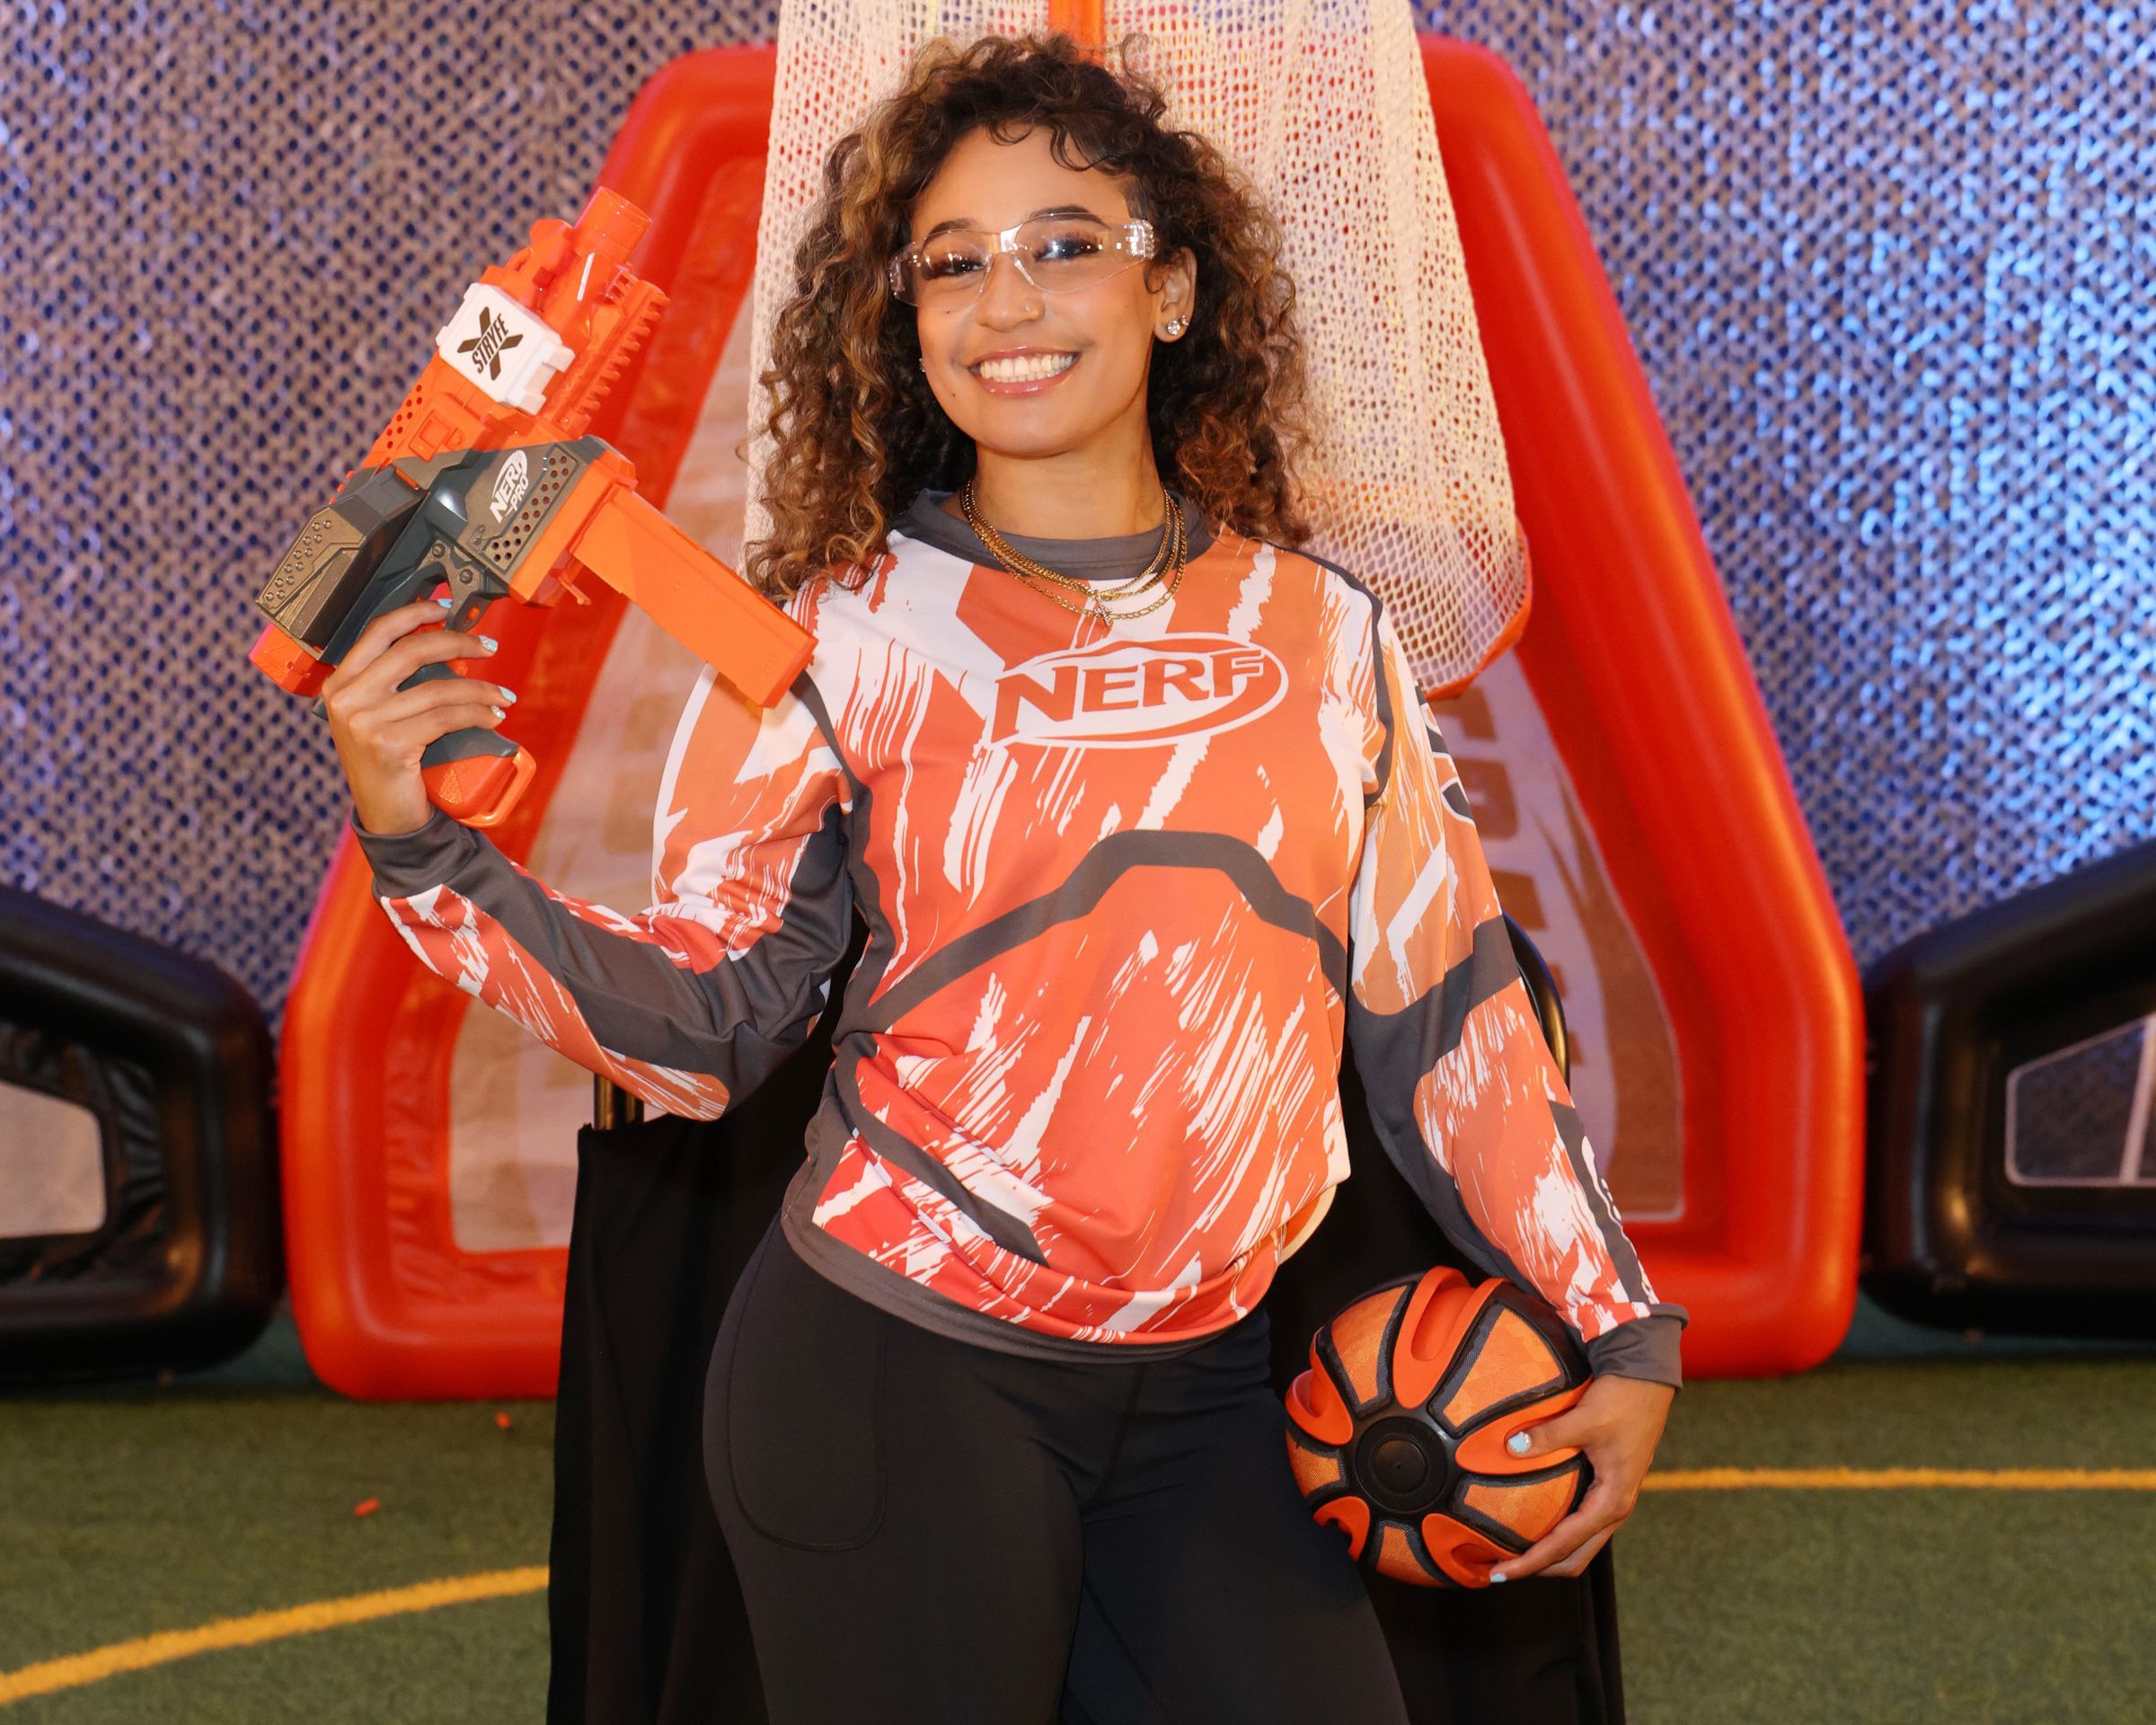 A college athlete poses with the Nerfball and Stryfe X blaster while wearing a hit-detection suit in orange and white.